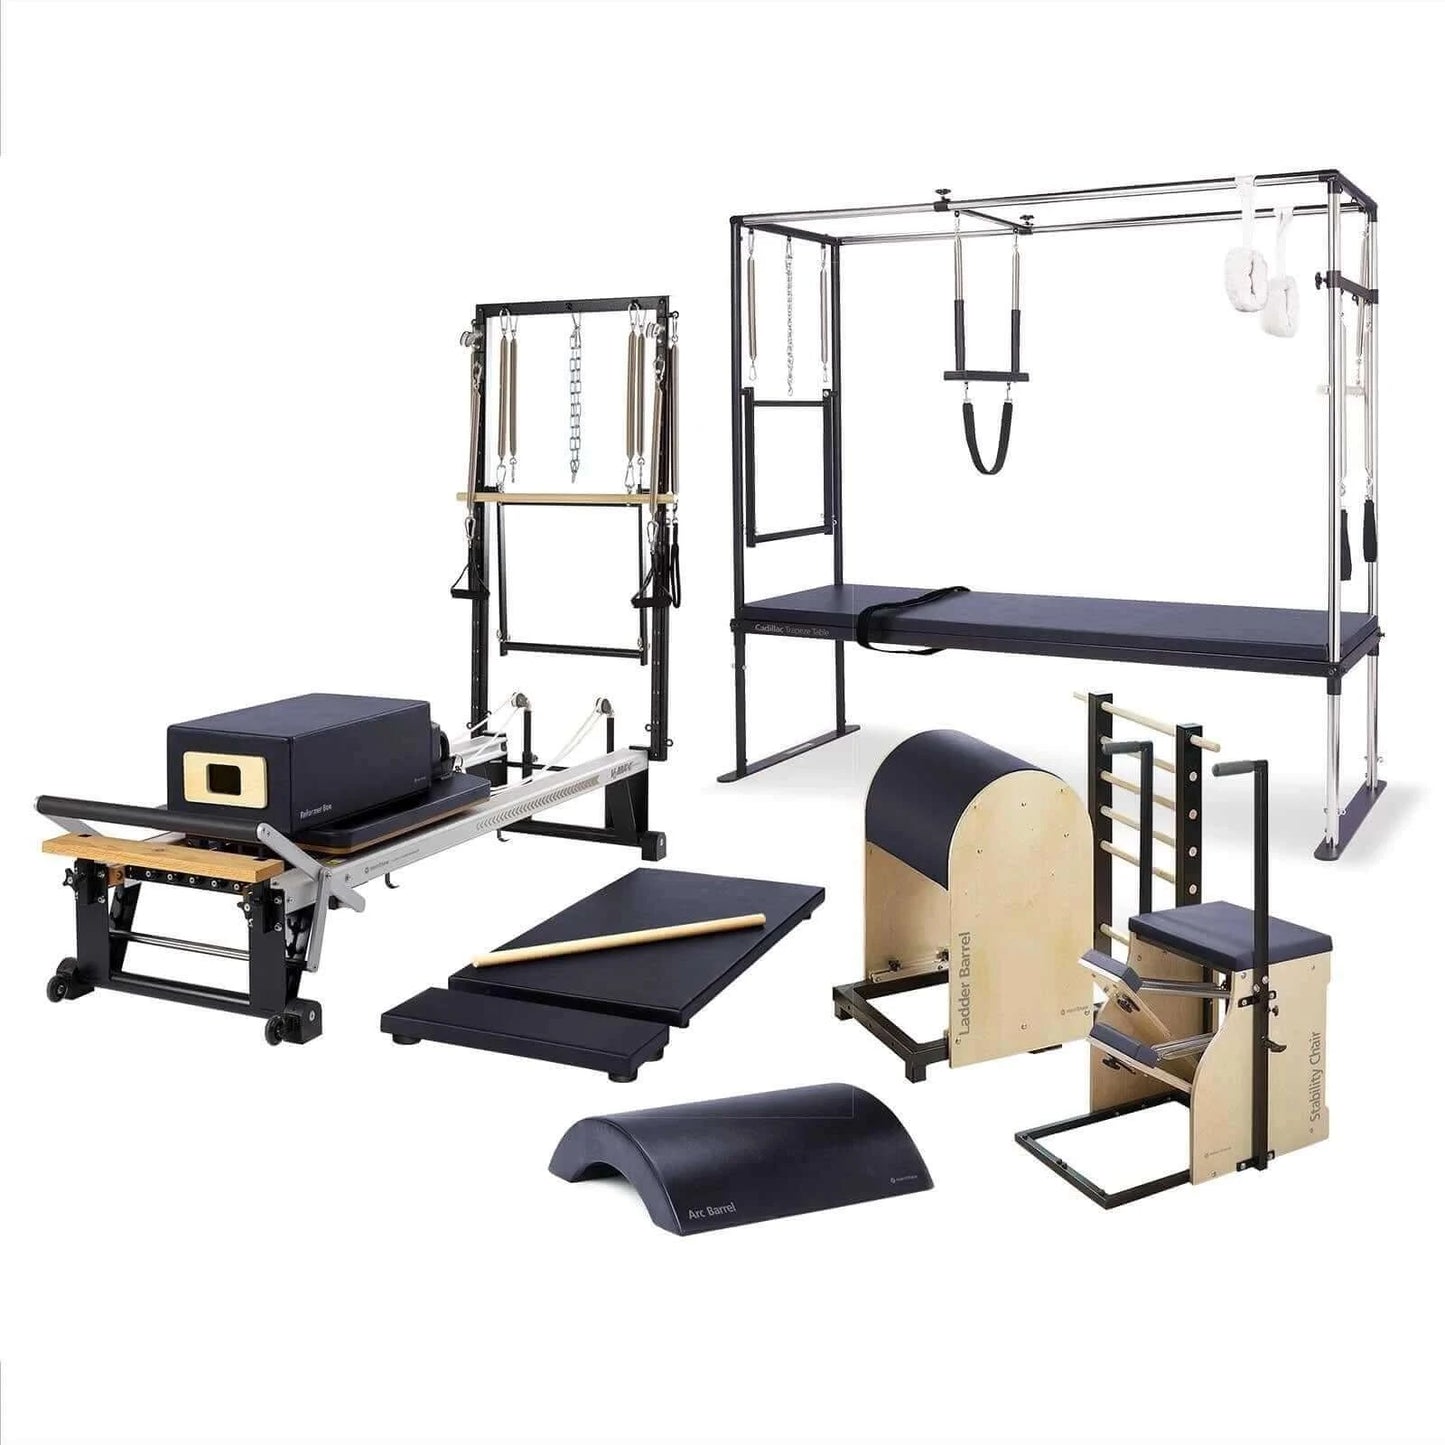 Eclipse Merrithew™ Pilates Rehab Enhanced One-On-One Studio Bundle by Merrithew™ sold by Pilates Matters® by BSP LLC